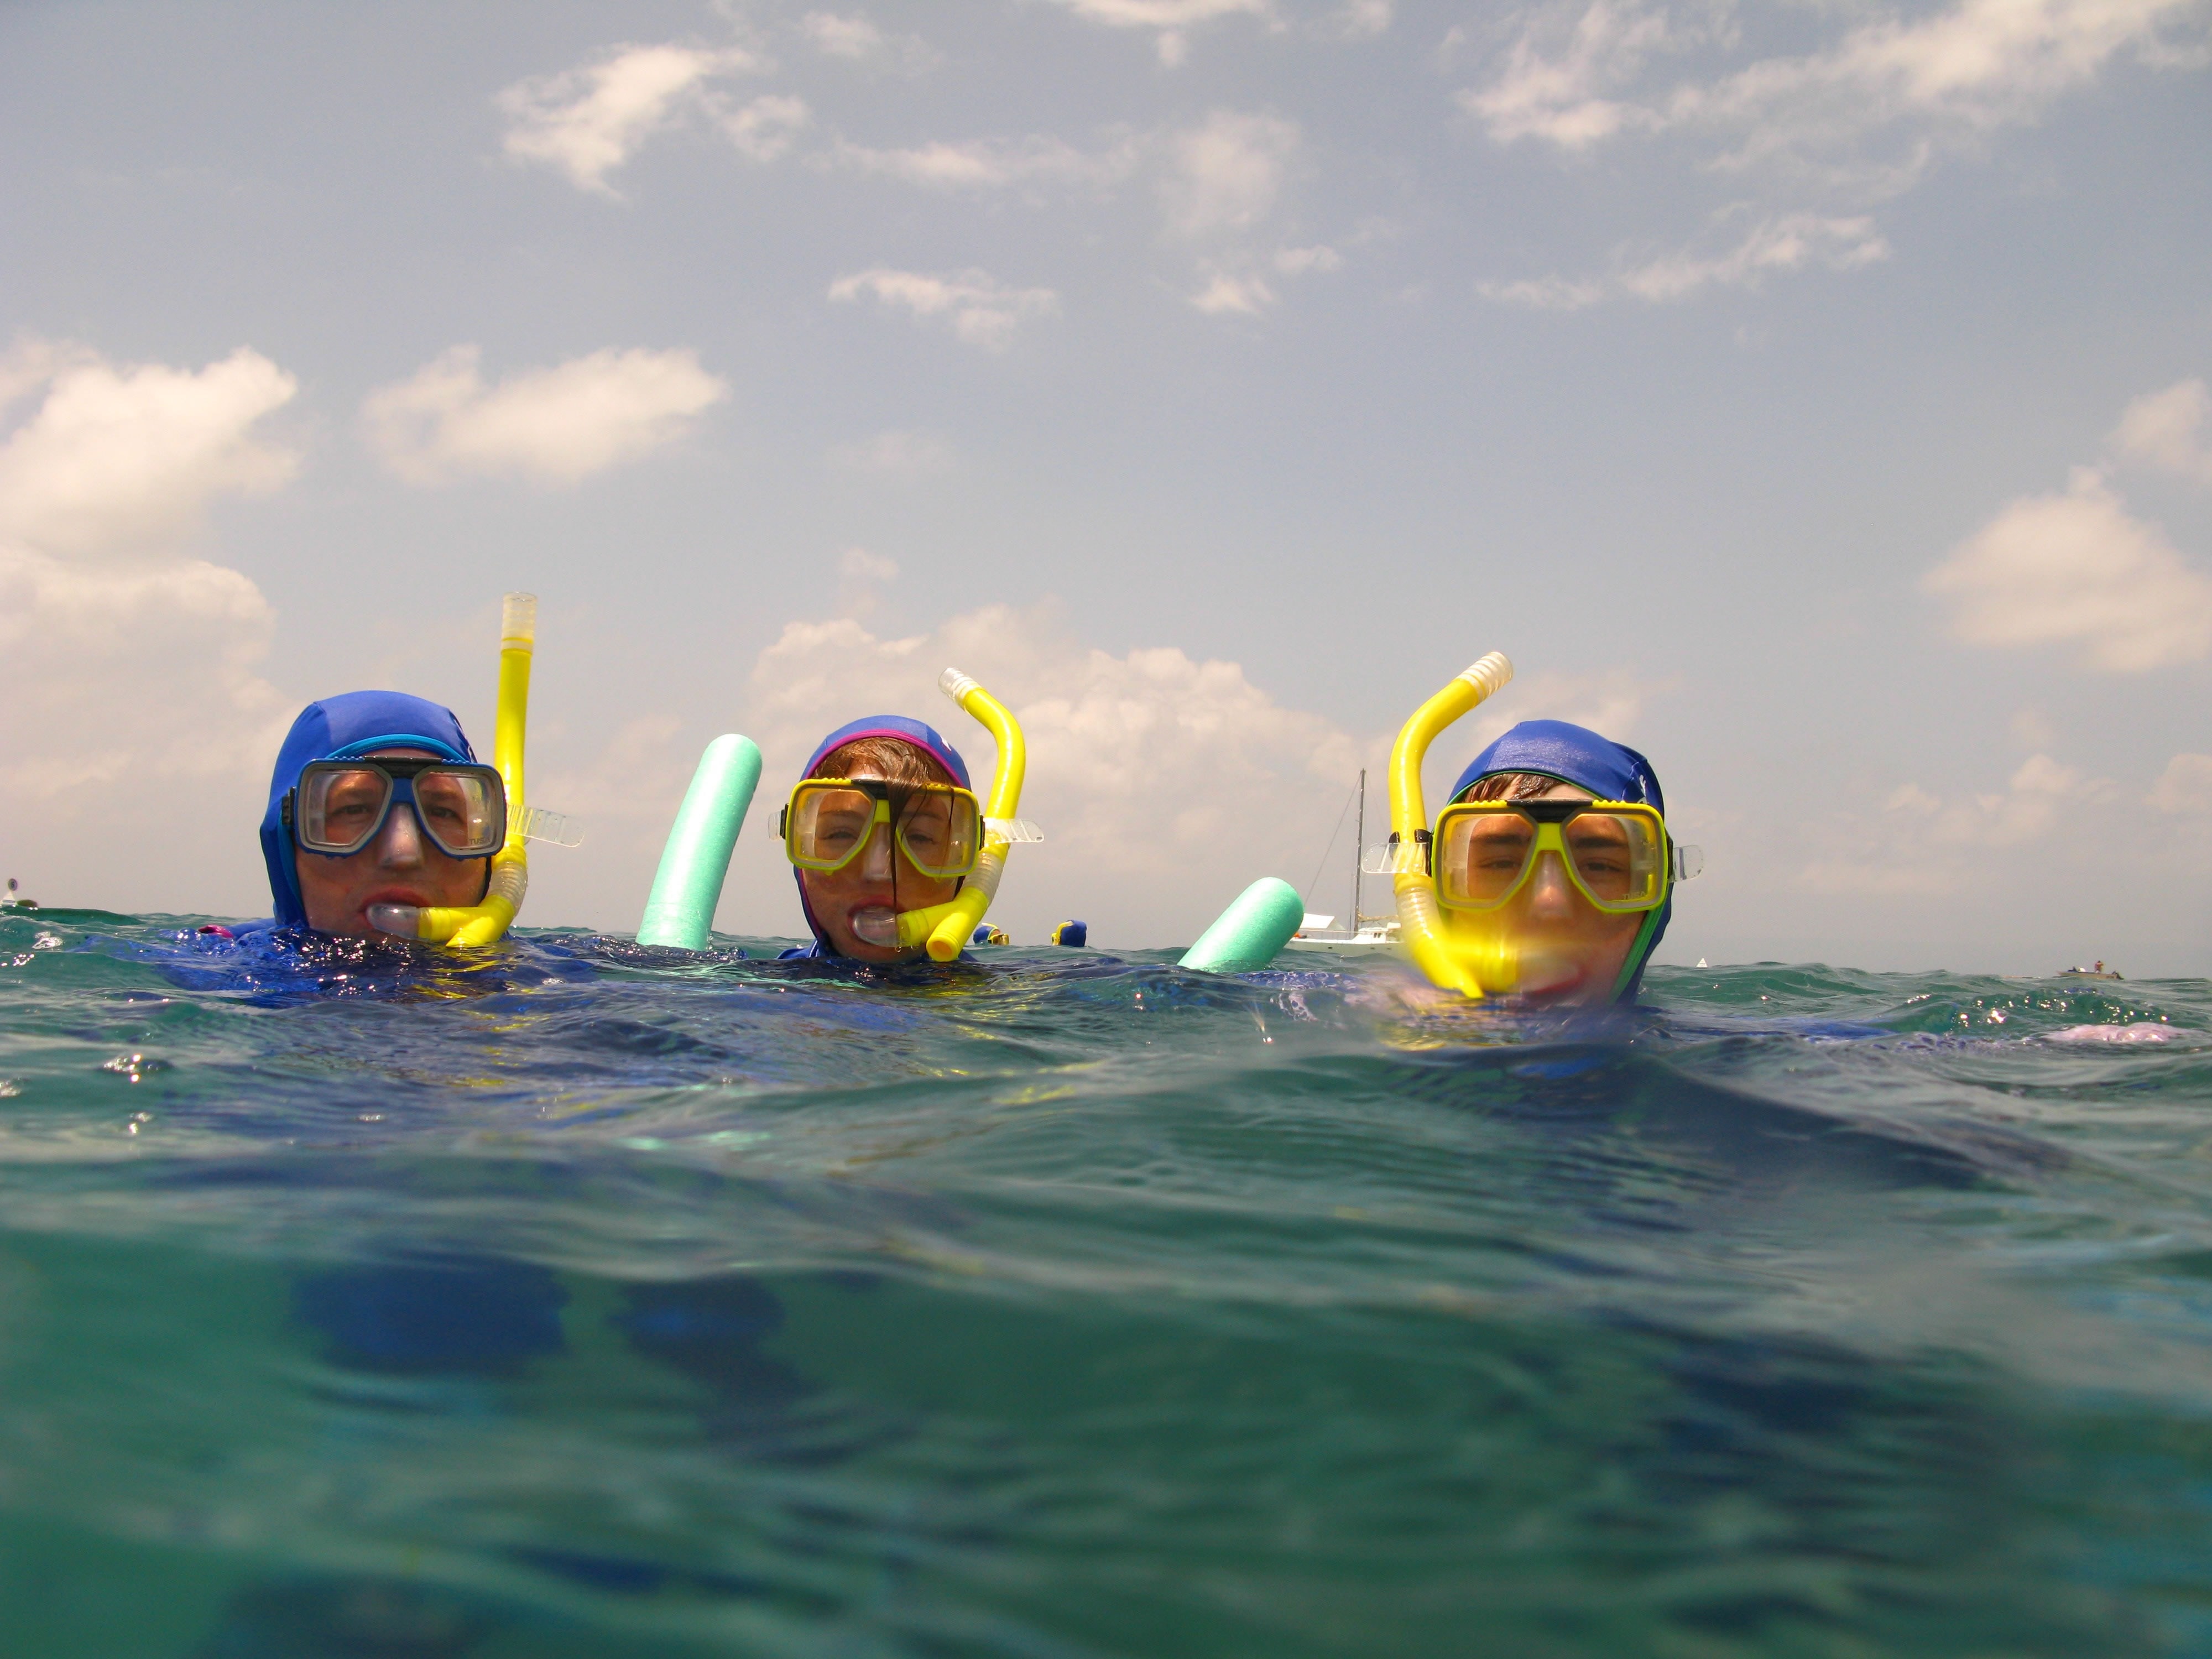 three person floating on sea wearing wetsuit and snorkels during daytime